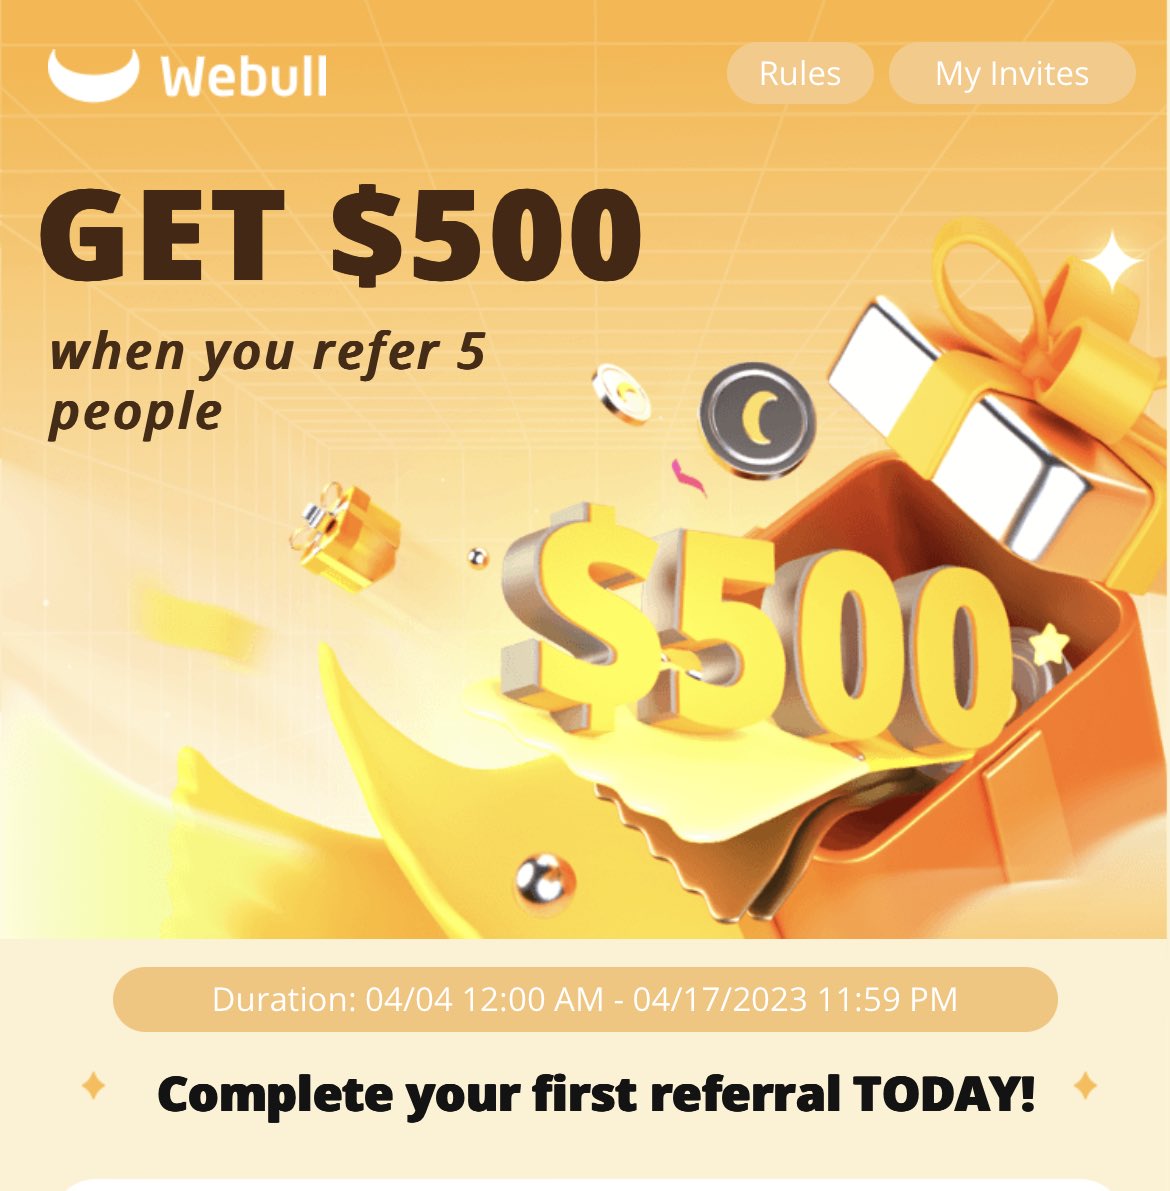 I get $500 of #Apple stocks for 5 referrals! On top of the free stock you’ll get for signing up, I’ll split the $500 equally between us!  That’s about $83 added value. Just a thought! #Webull #FreeStocks